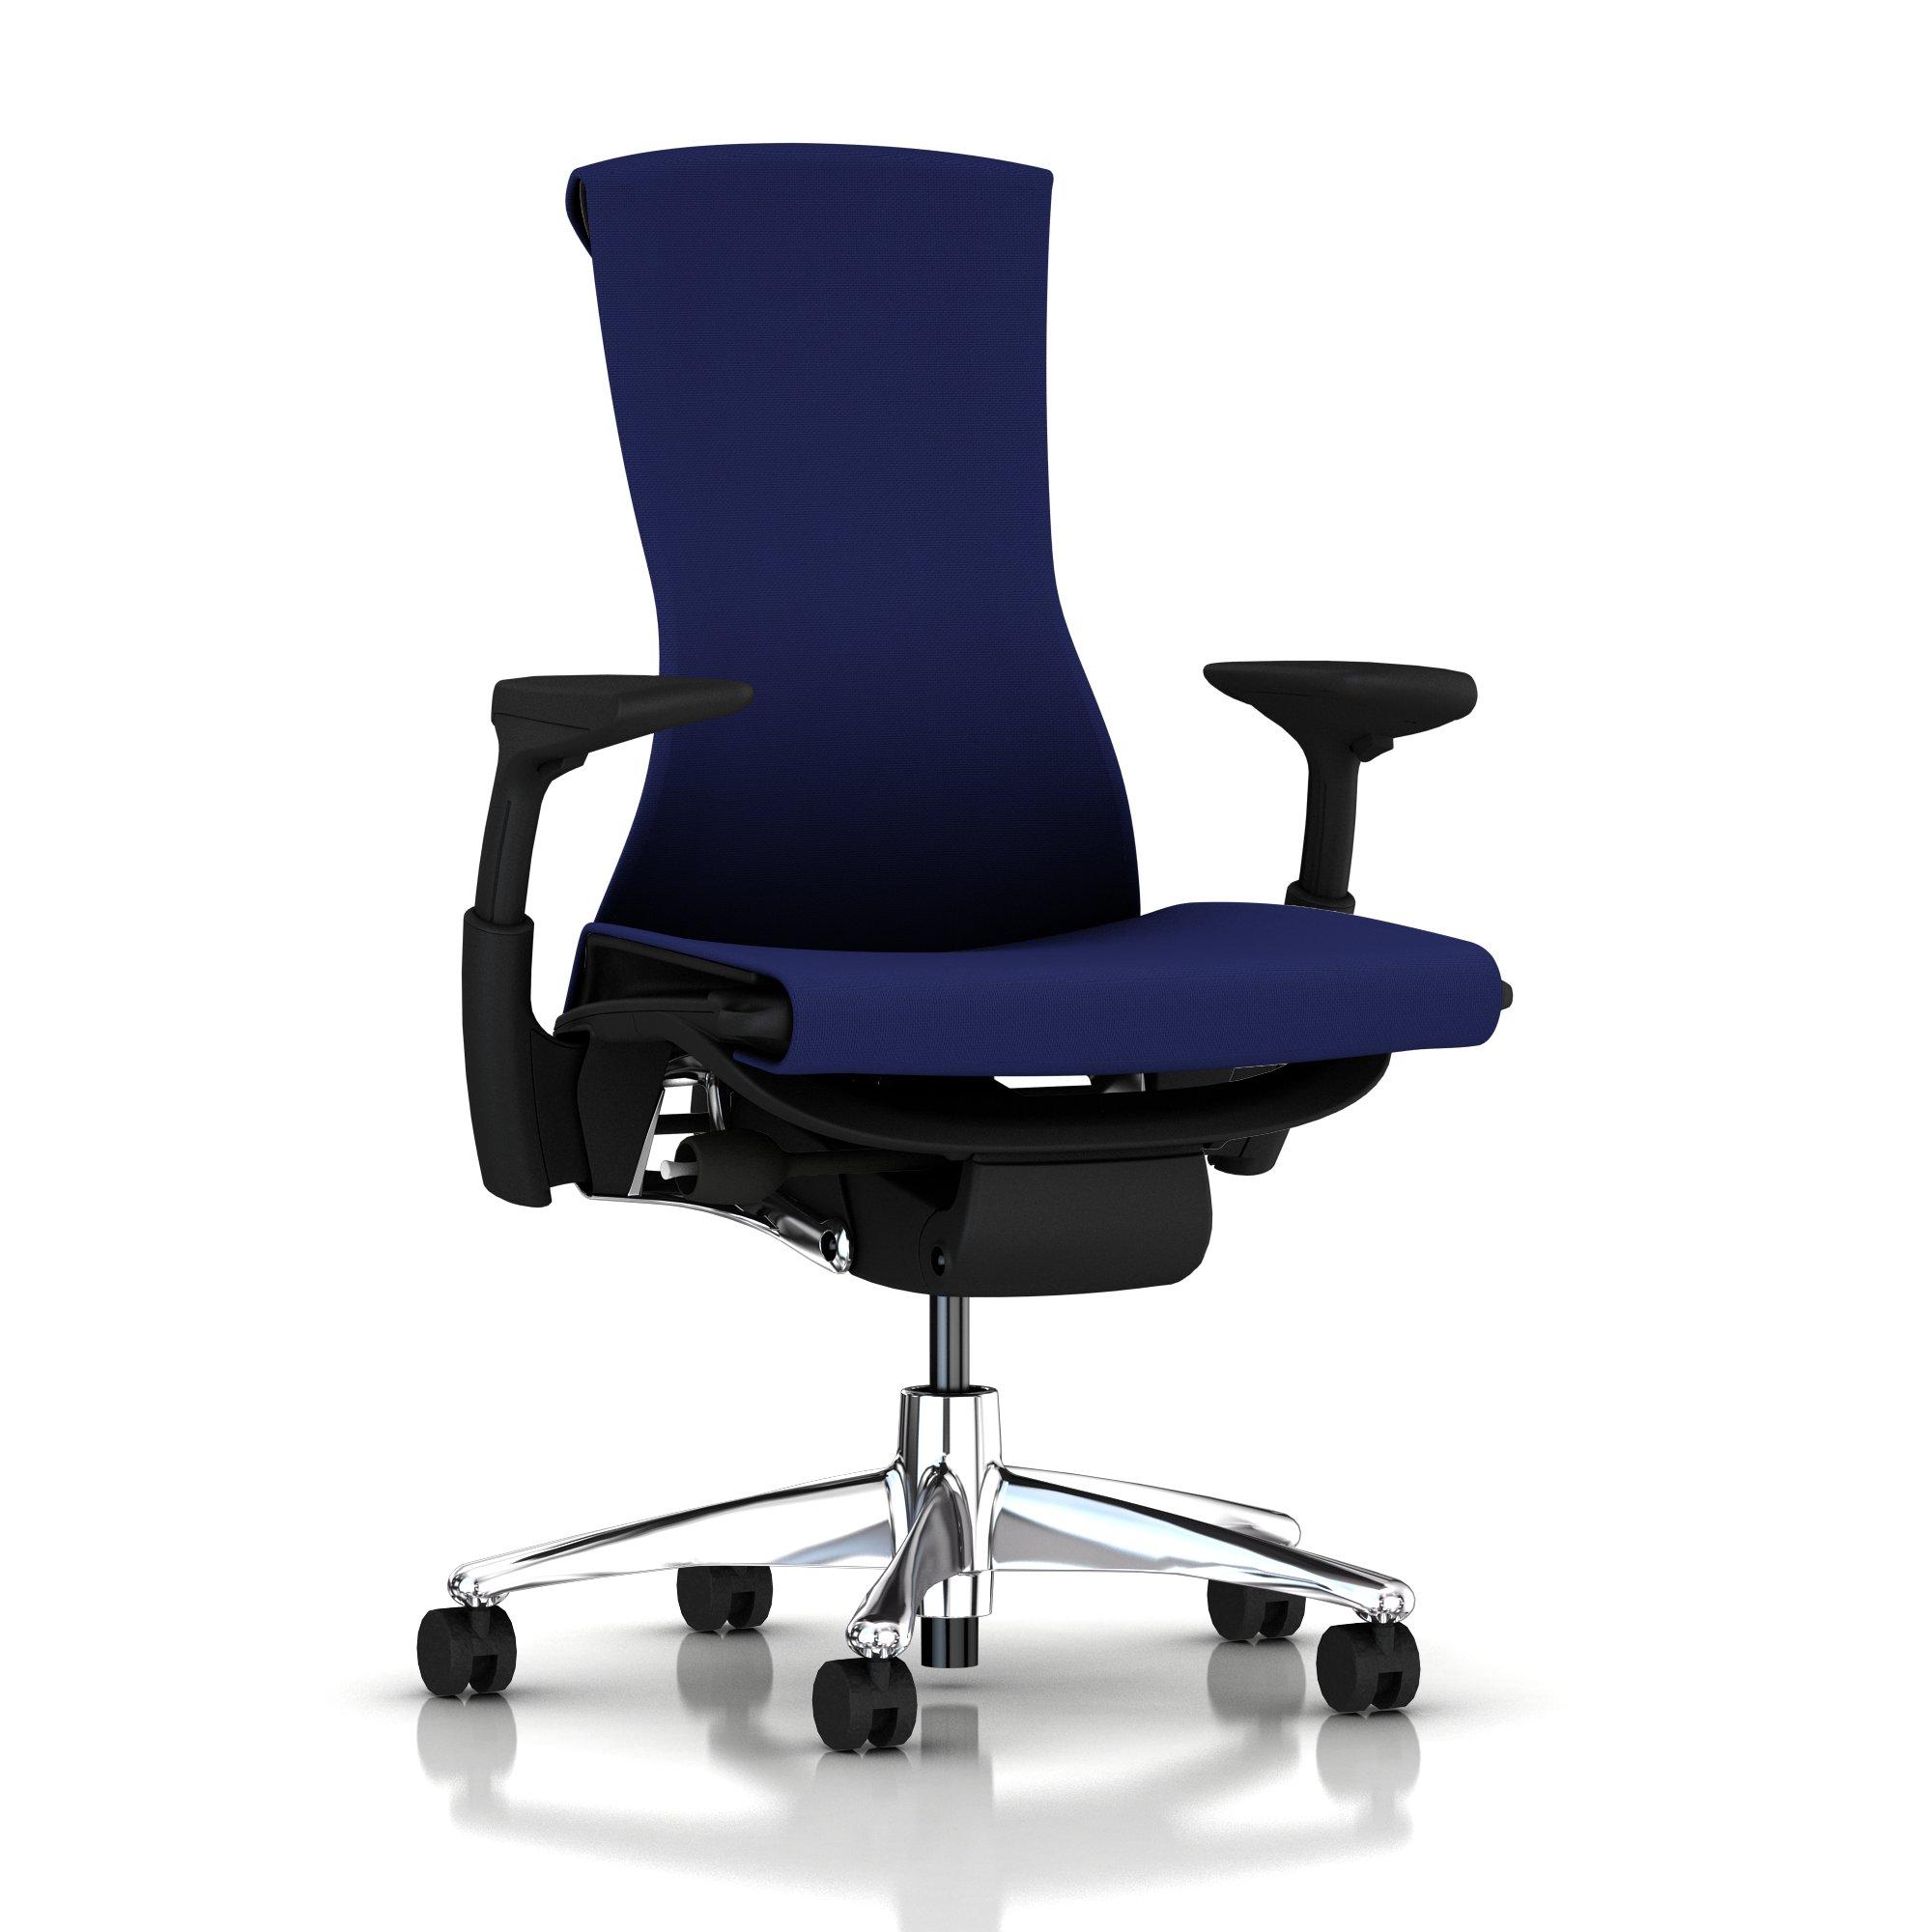 Embody Chair Twilight Blue Rhythm with Graphite Frame Aluminum Base by Herman Miller